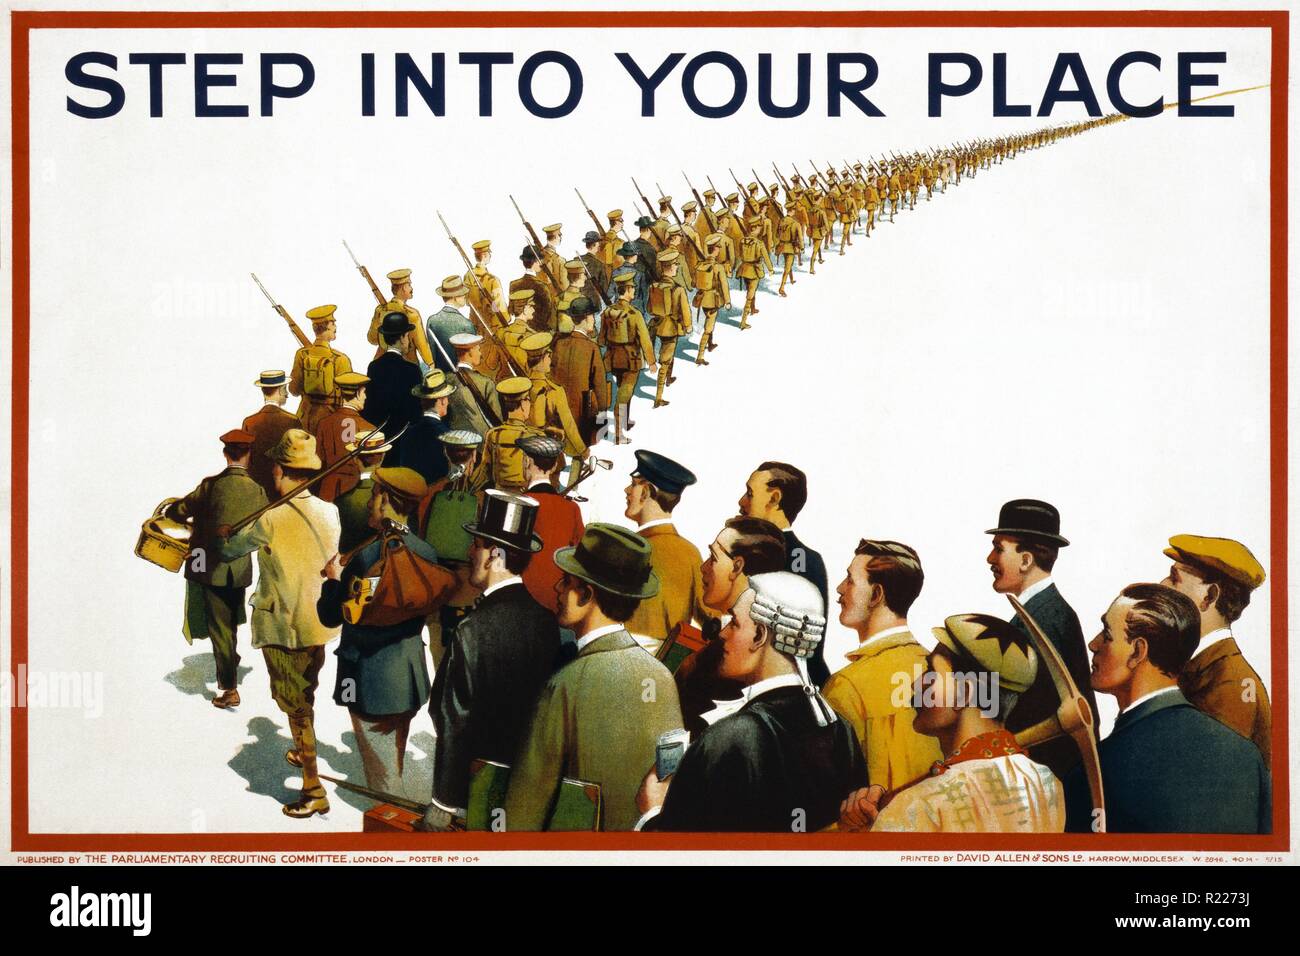 'Step Into Your Place', 1915. Recruiting poster, unknown artist, World War One, 1915. A column of civilians from different professions and trades merge into a line of soldiers going to war Stock Photo